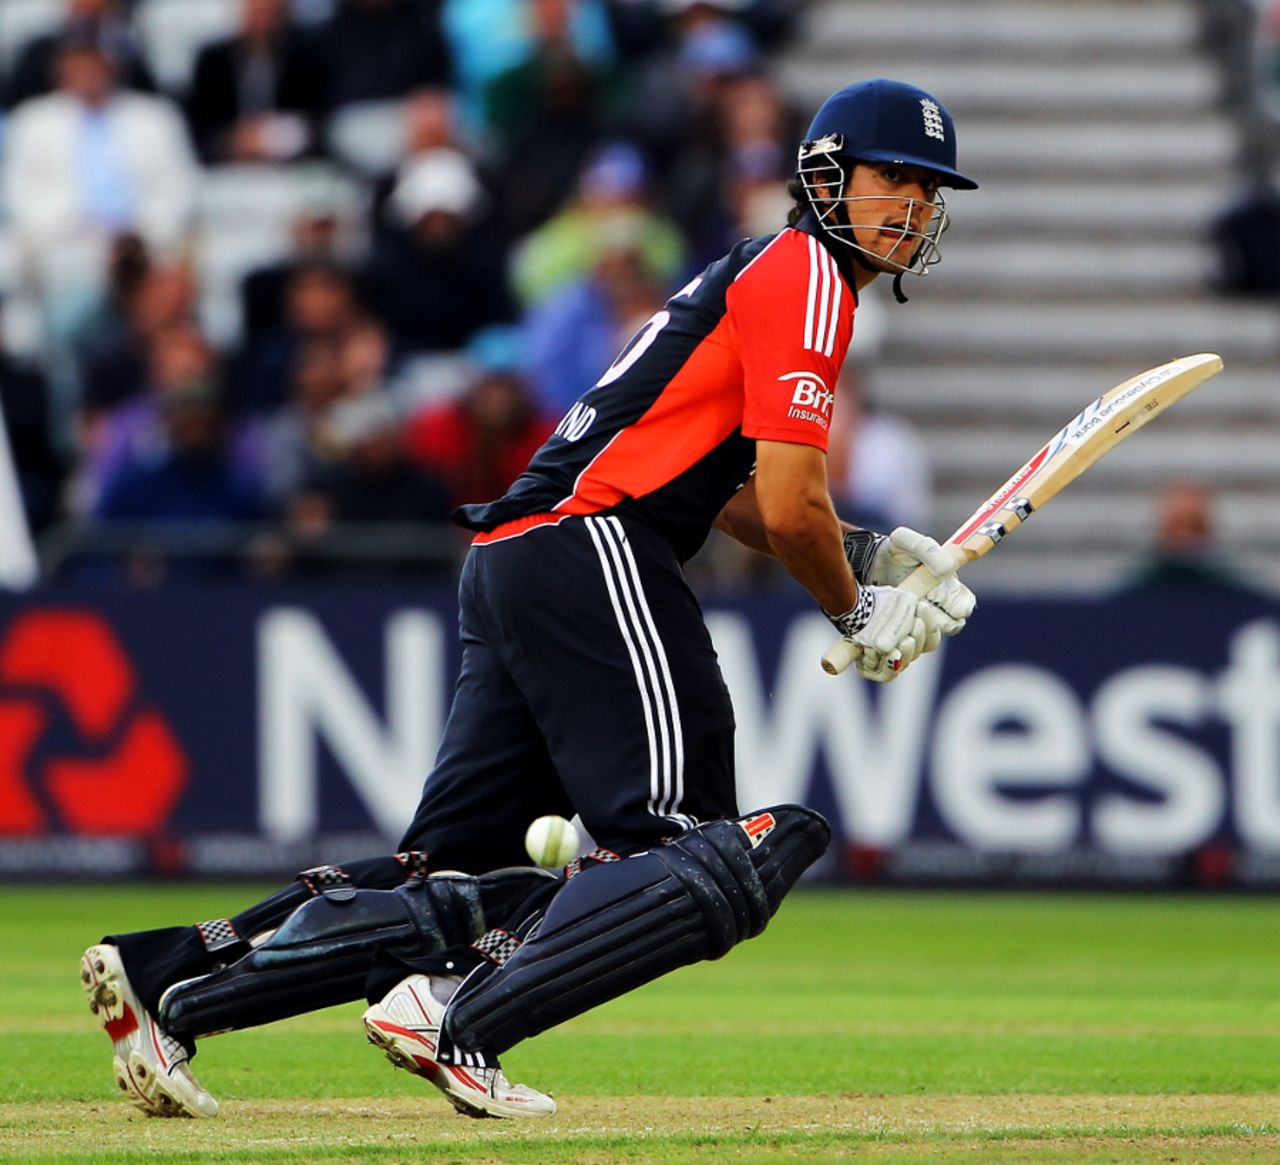 Alastair Cook whips into the leg side during his 37-ball fifty, England v Sri Lanka, 4th ODI, Trent Bridge, July 6 2011